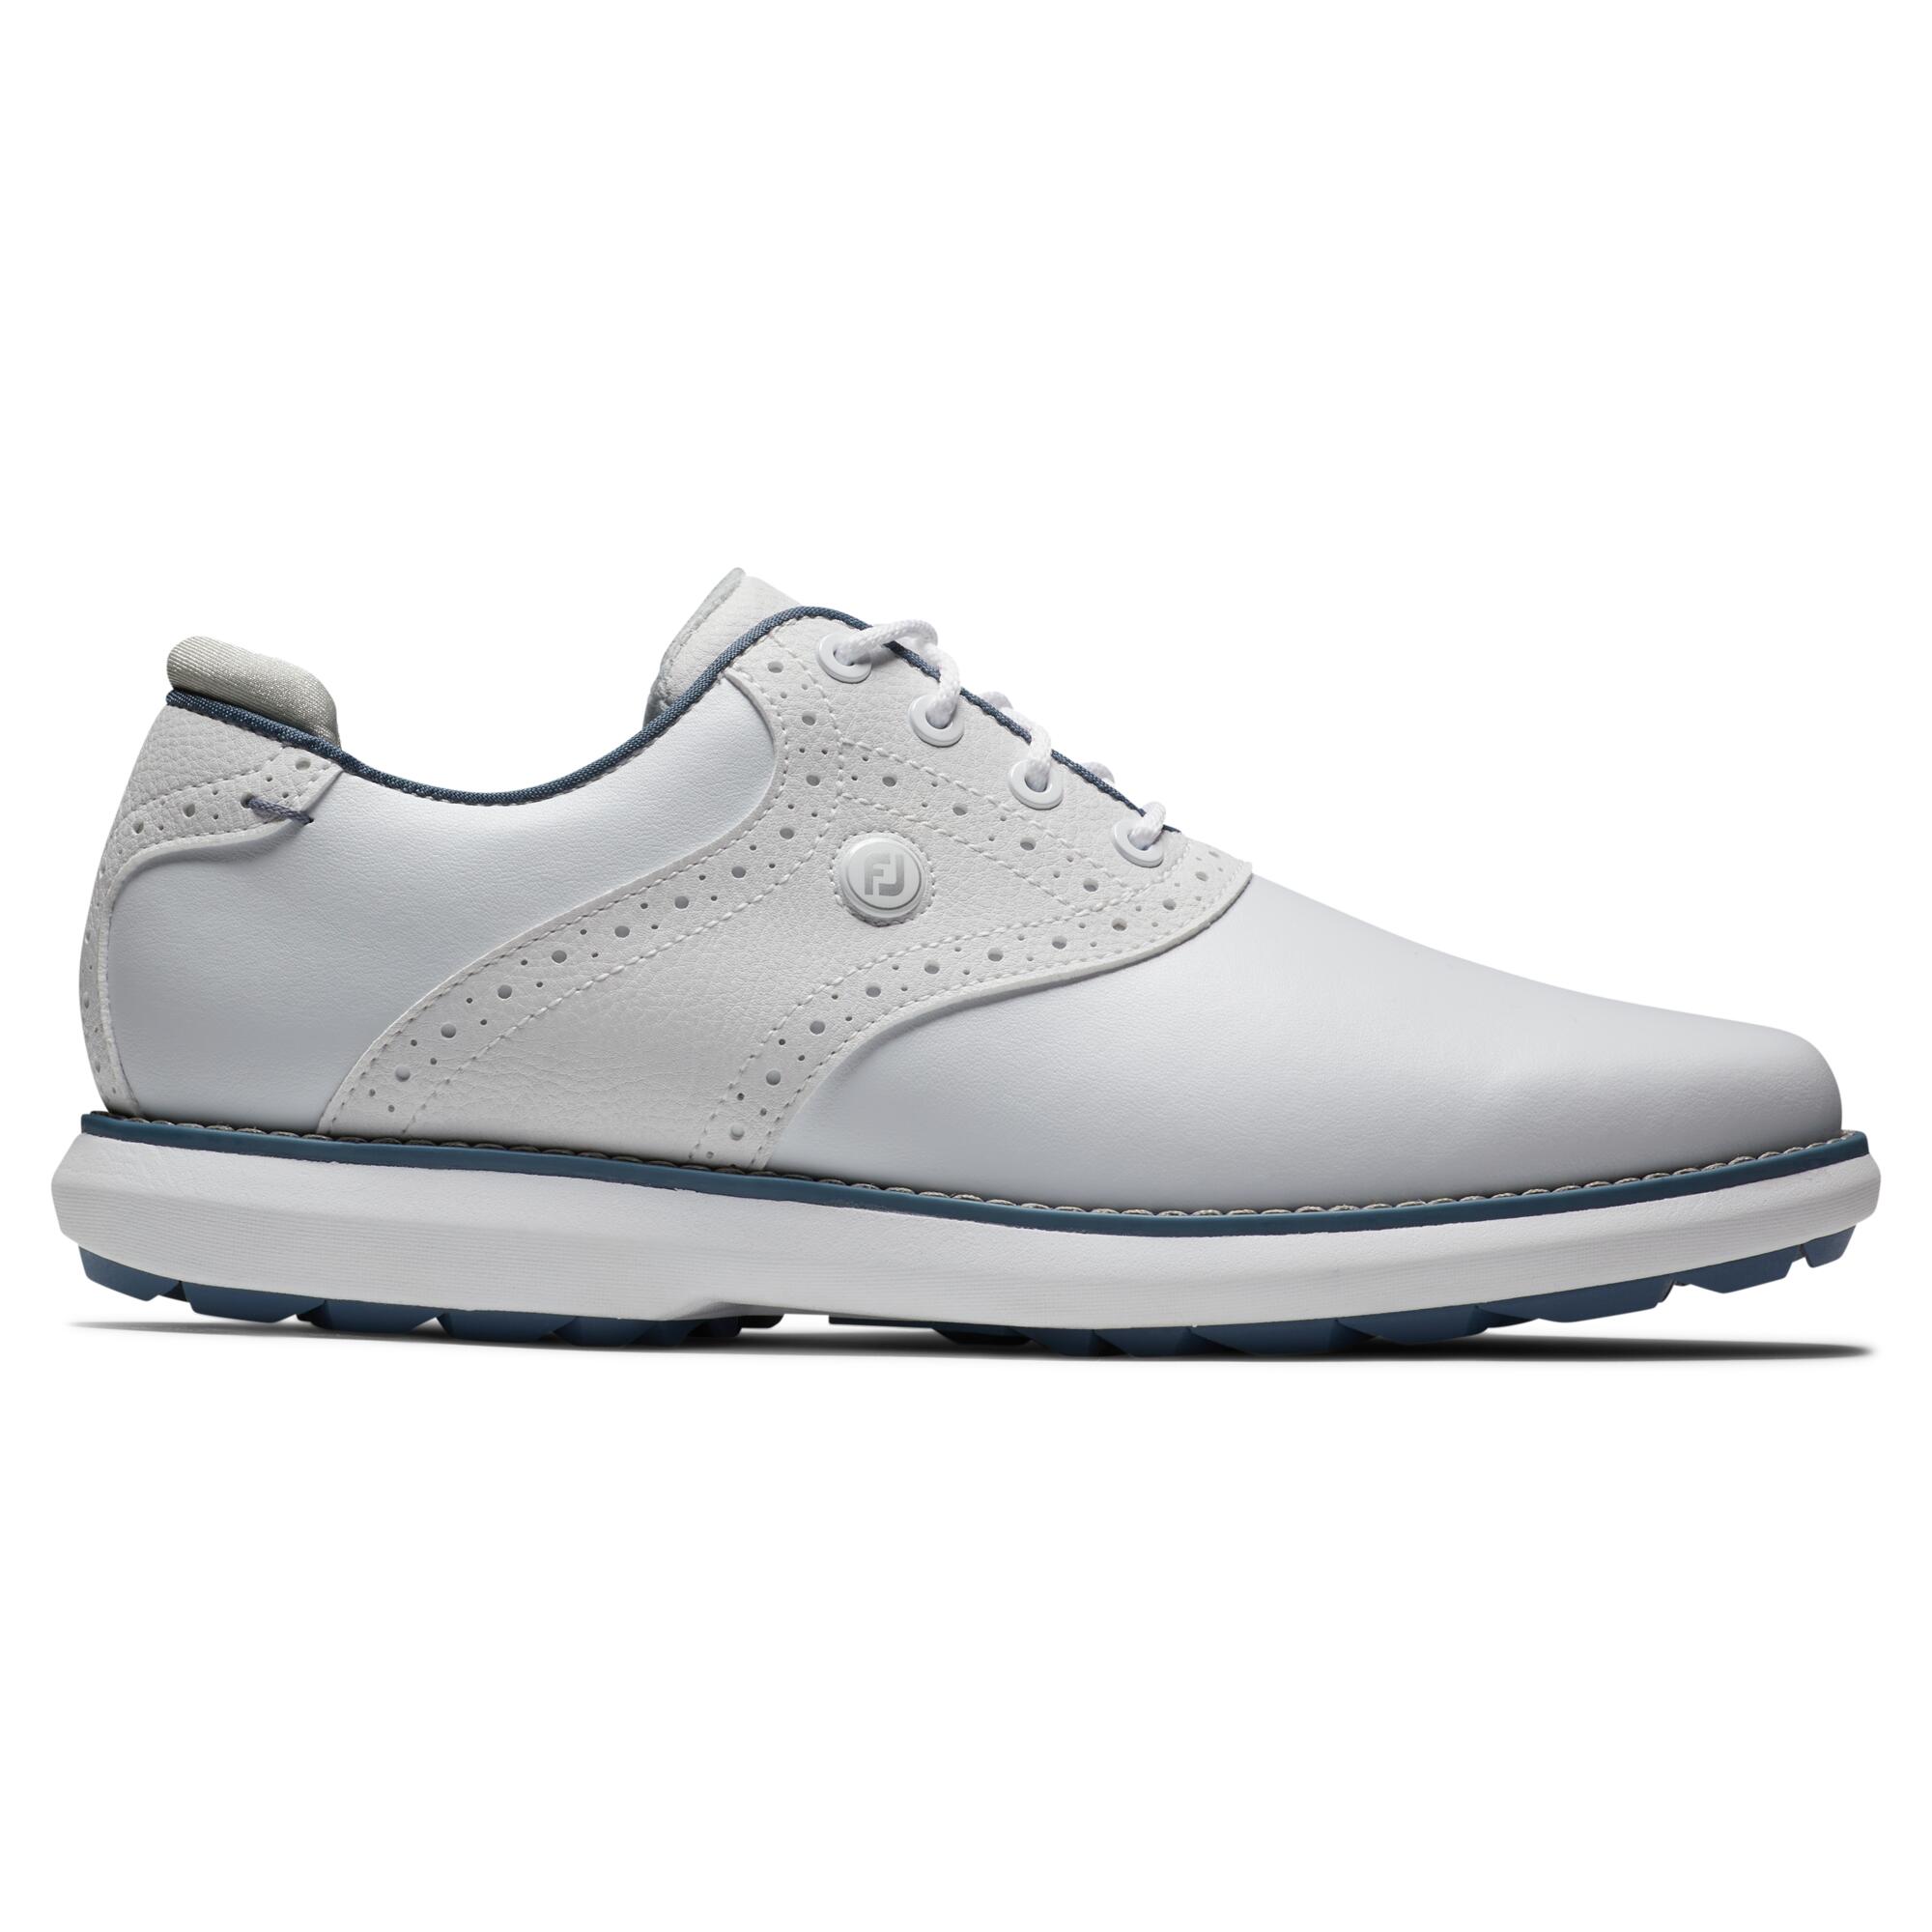 FOOTJOY Women's golf shoes spikeless - Tradition white